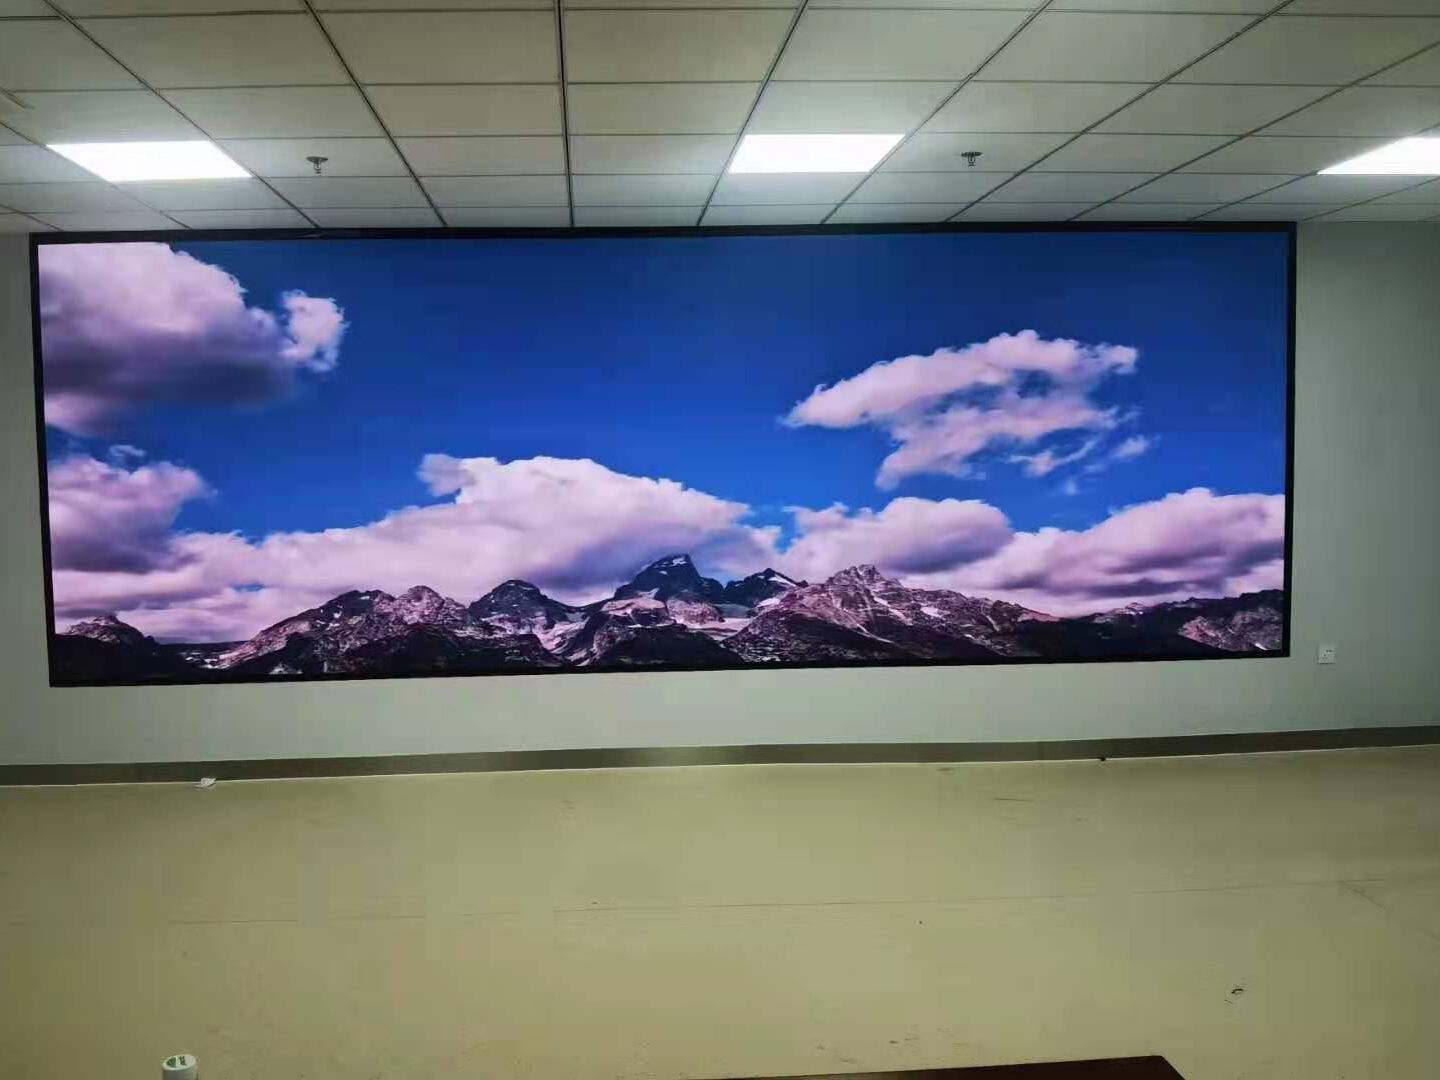 P1.2 Cob Led Module Display Effect In Digital Exhibition Hall